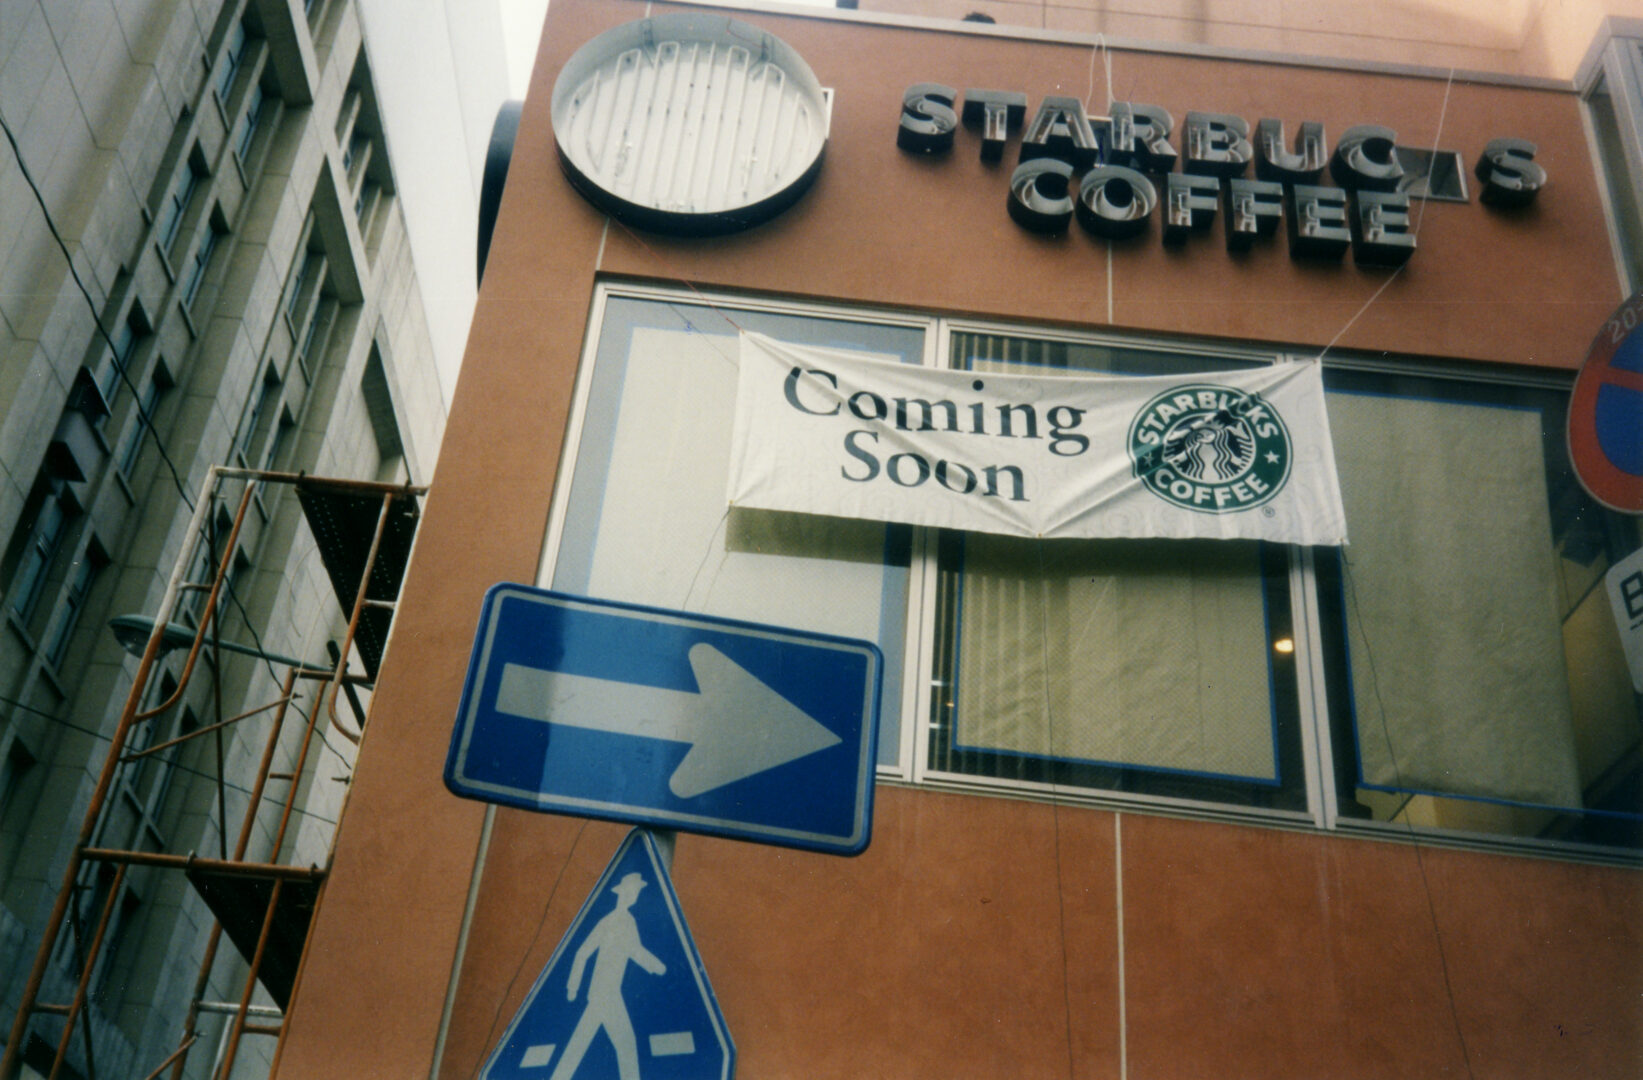 Image of Starbucks' store front with 'coming soon' sign.